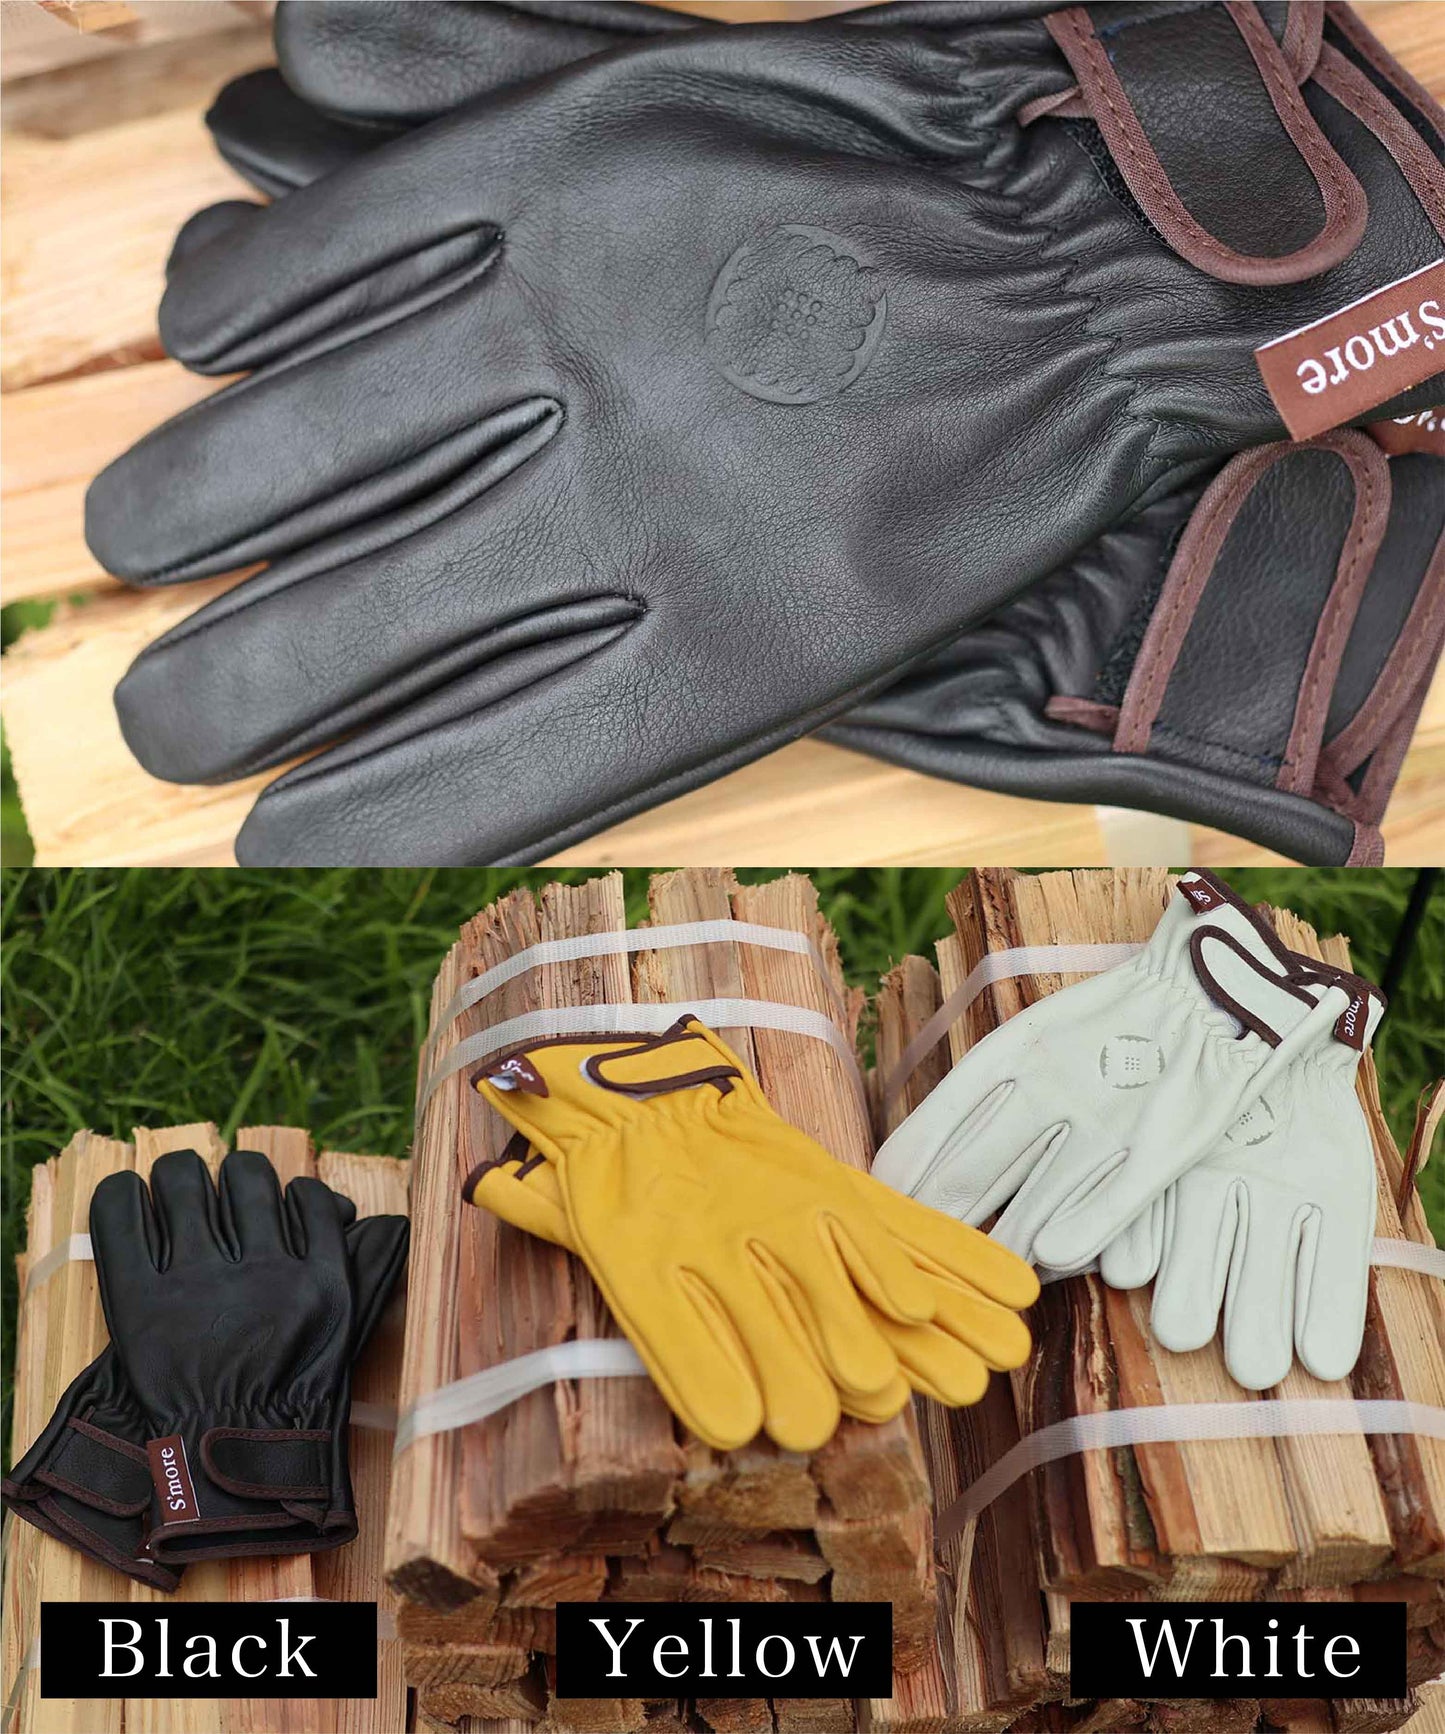 【S'more / Leather gloves 】耐火グローブ 耐熱グローブ